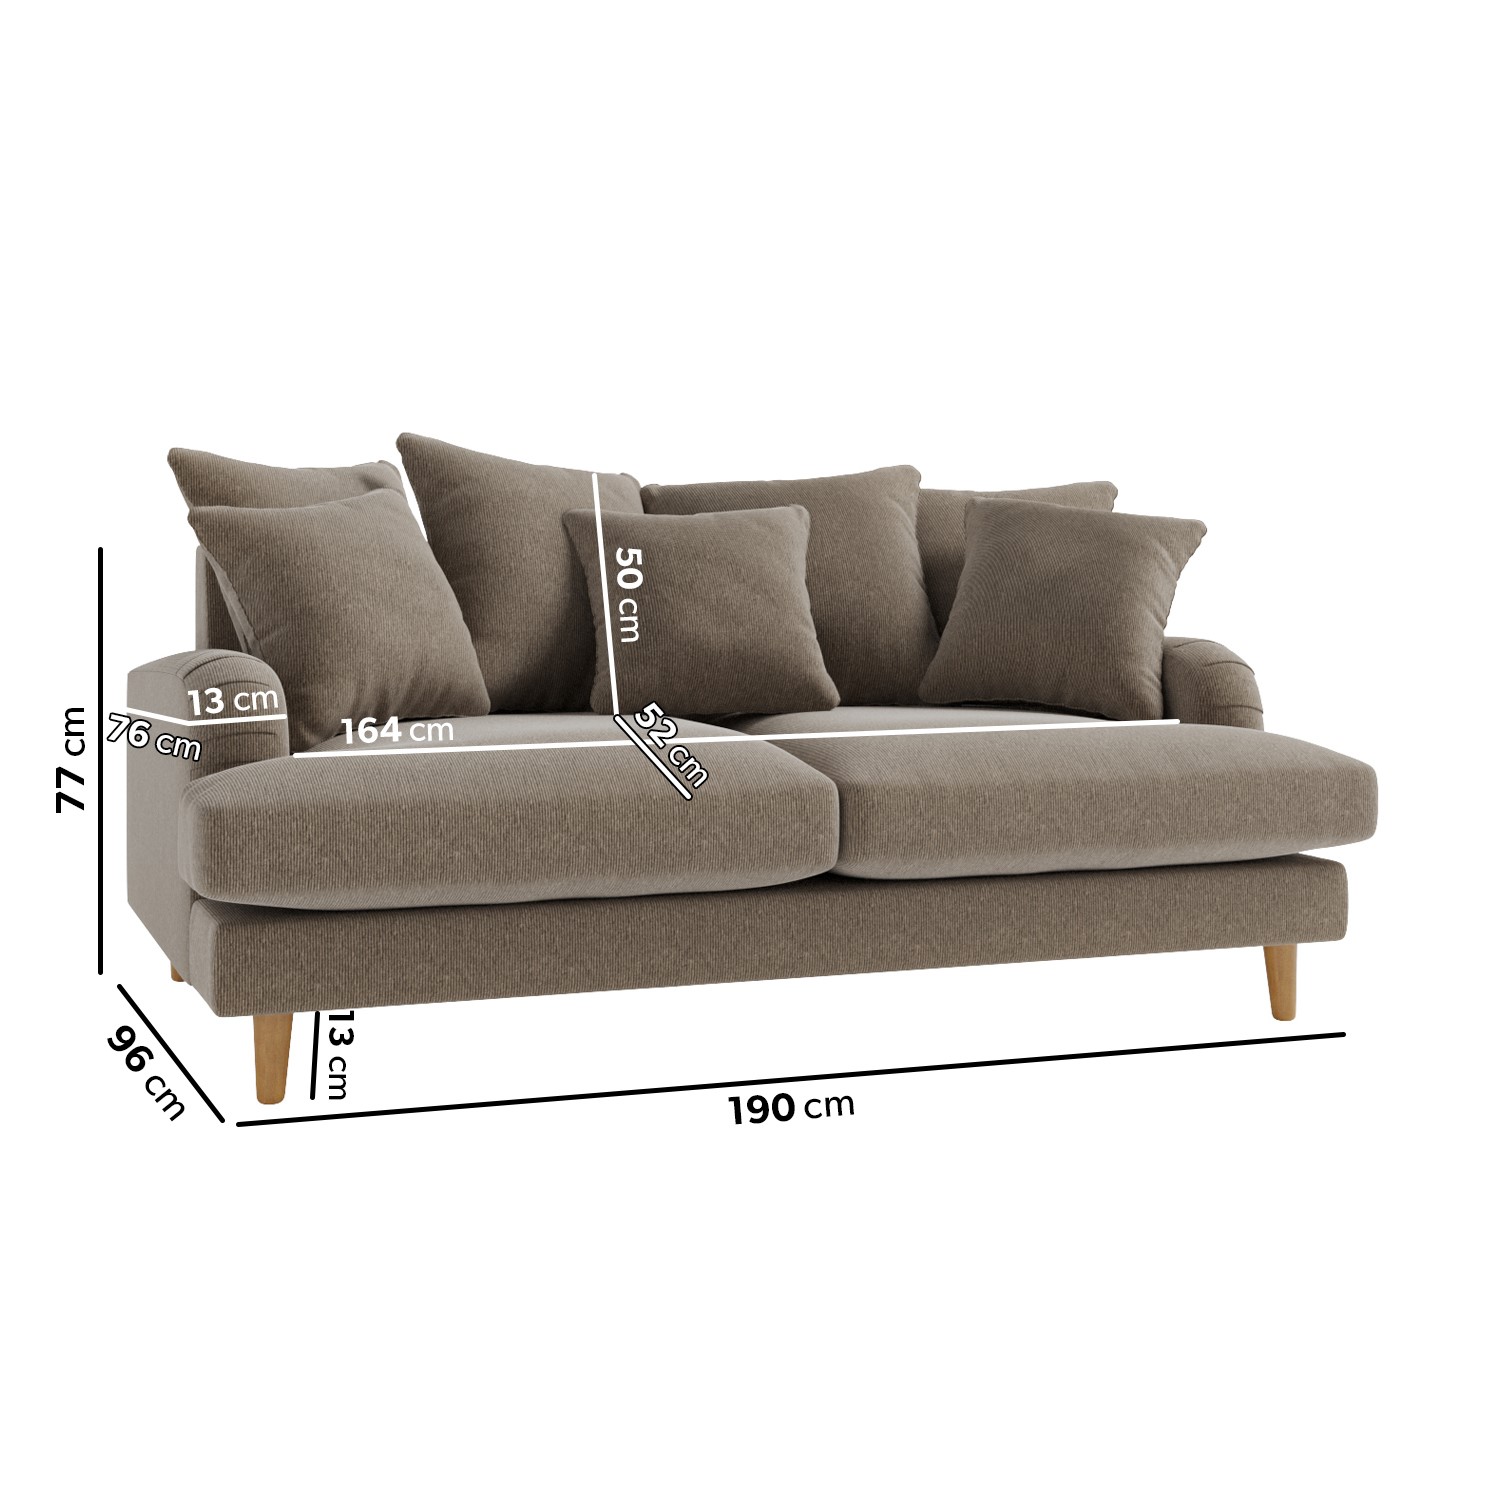 Read more about Beige fabric scatter back sofa seats 3 maisie